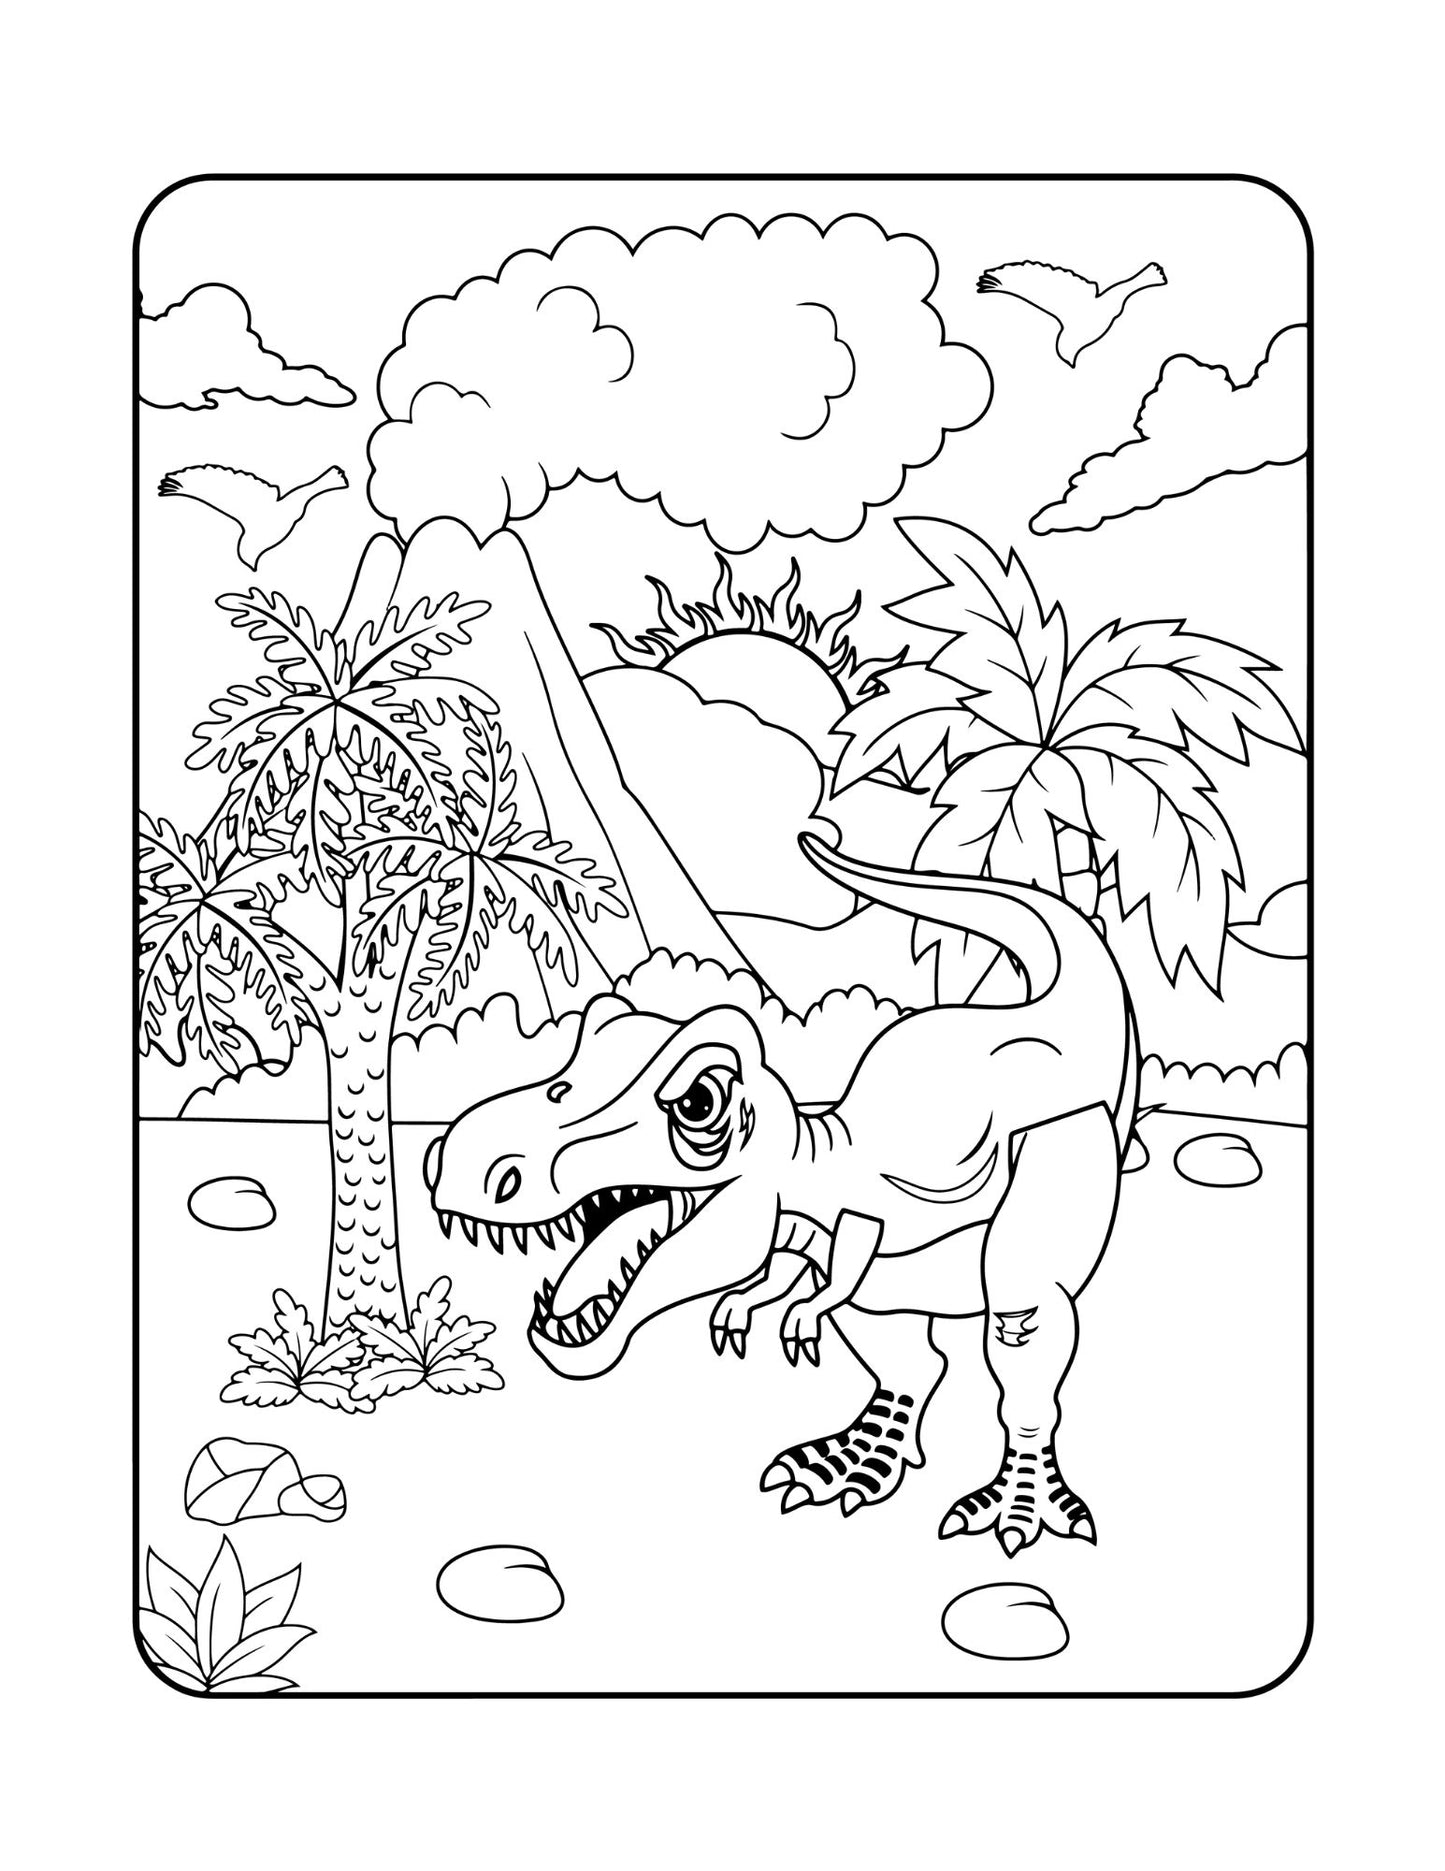 Dino Coloring Book Gift 50 Pages Dinosaur Activity Coloring Book Cute Baby Dinosaur Coloring Book Young Kids Adults Dinosaur Coloring Pages